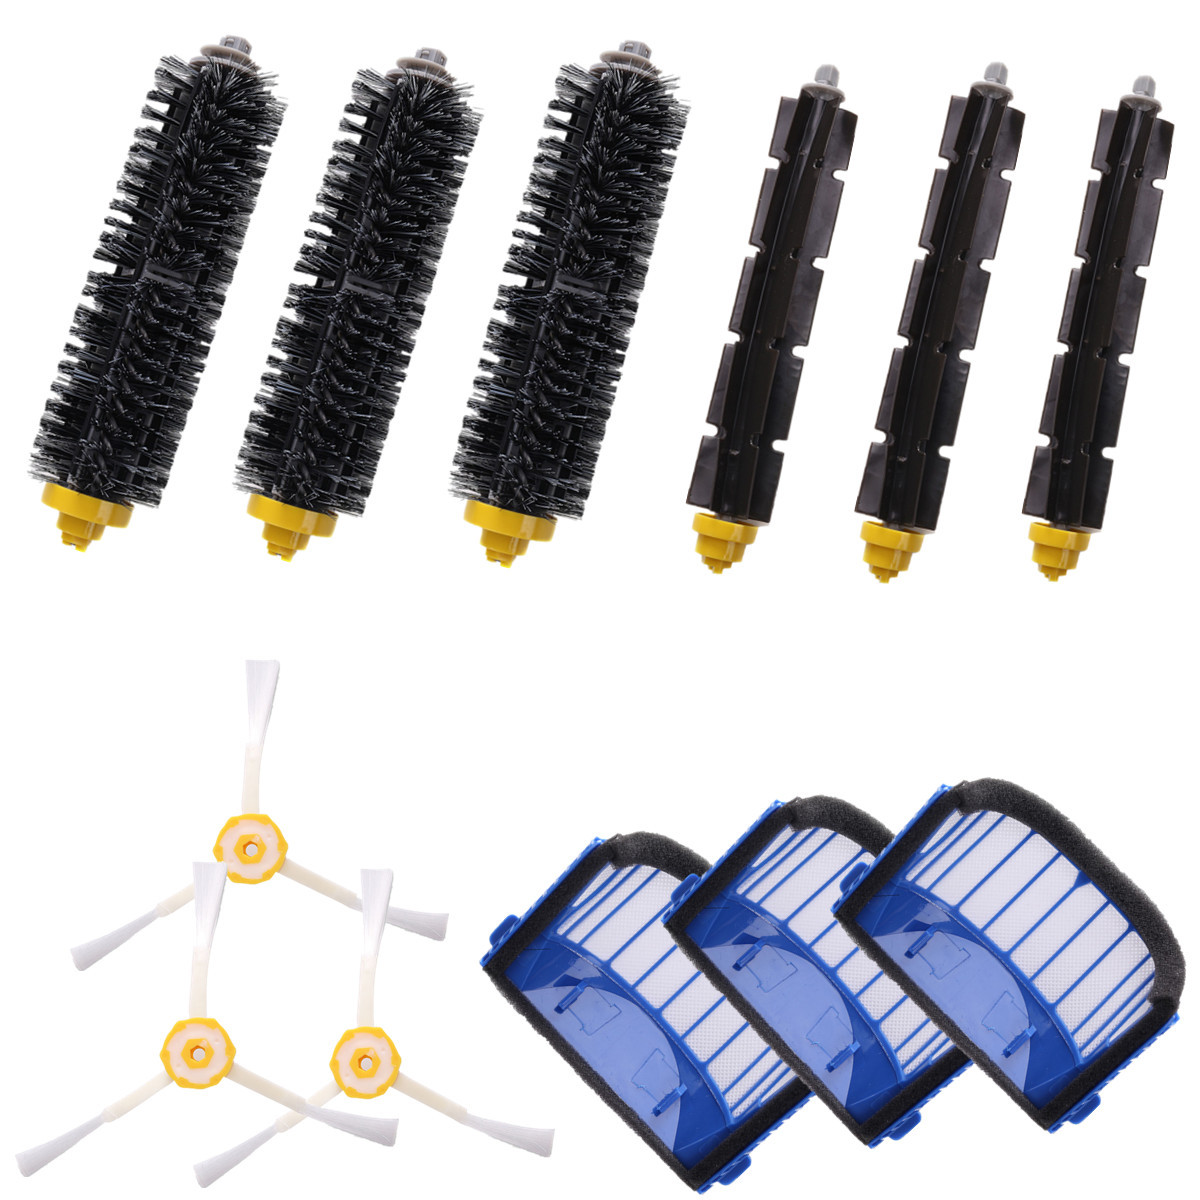 Accessory-Replacement-Kit-Brushes-Brushes-3-Armed-Aero-Vac-Filter-for-iRobot-600-Series-1338065-2